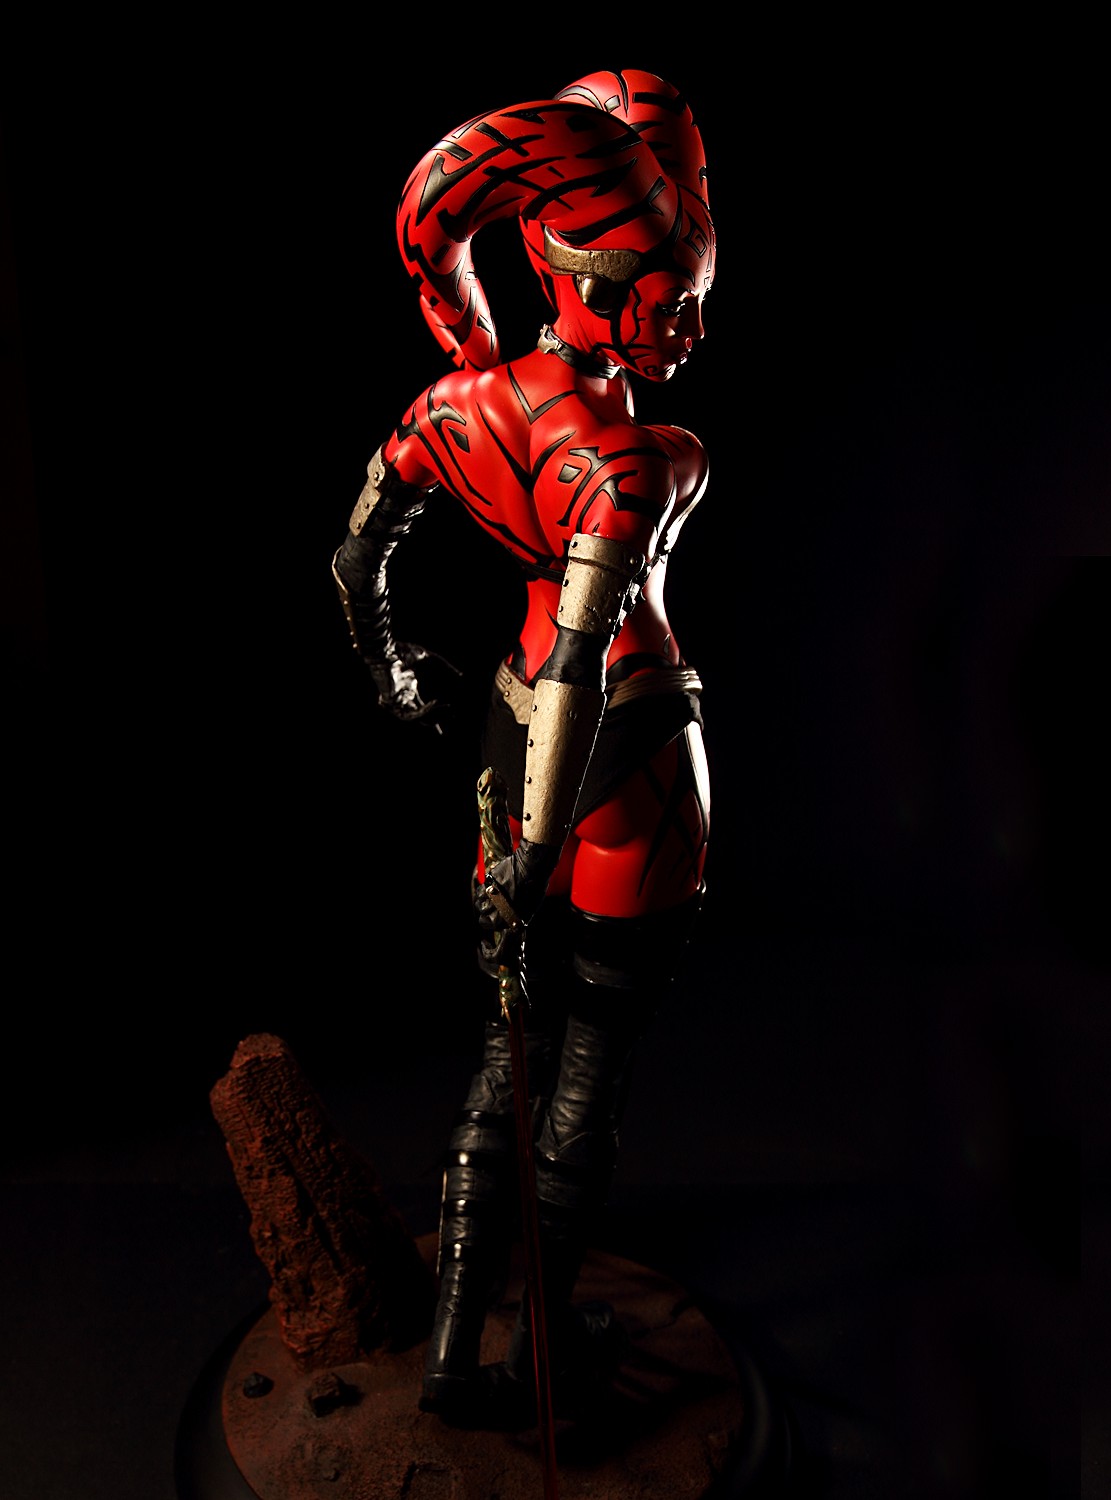 I ordered Darth Talon - she looked great but the one American comic book fi...